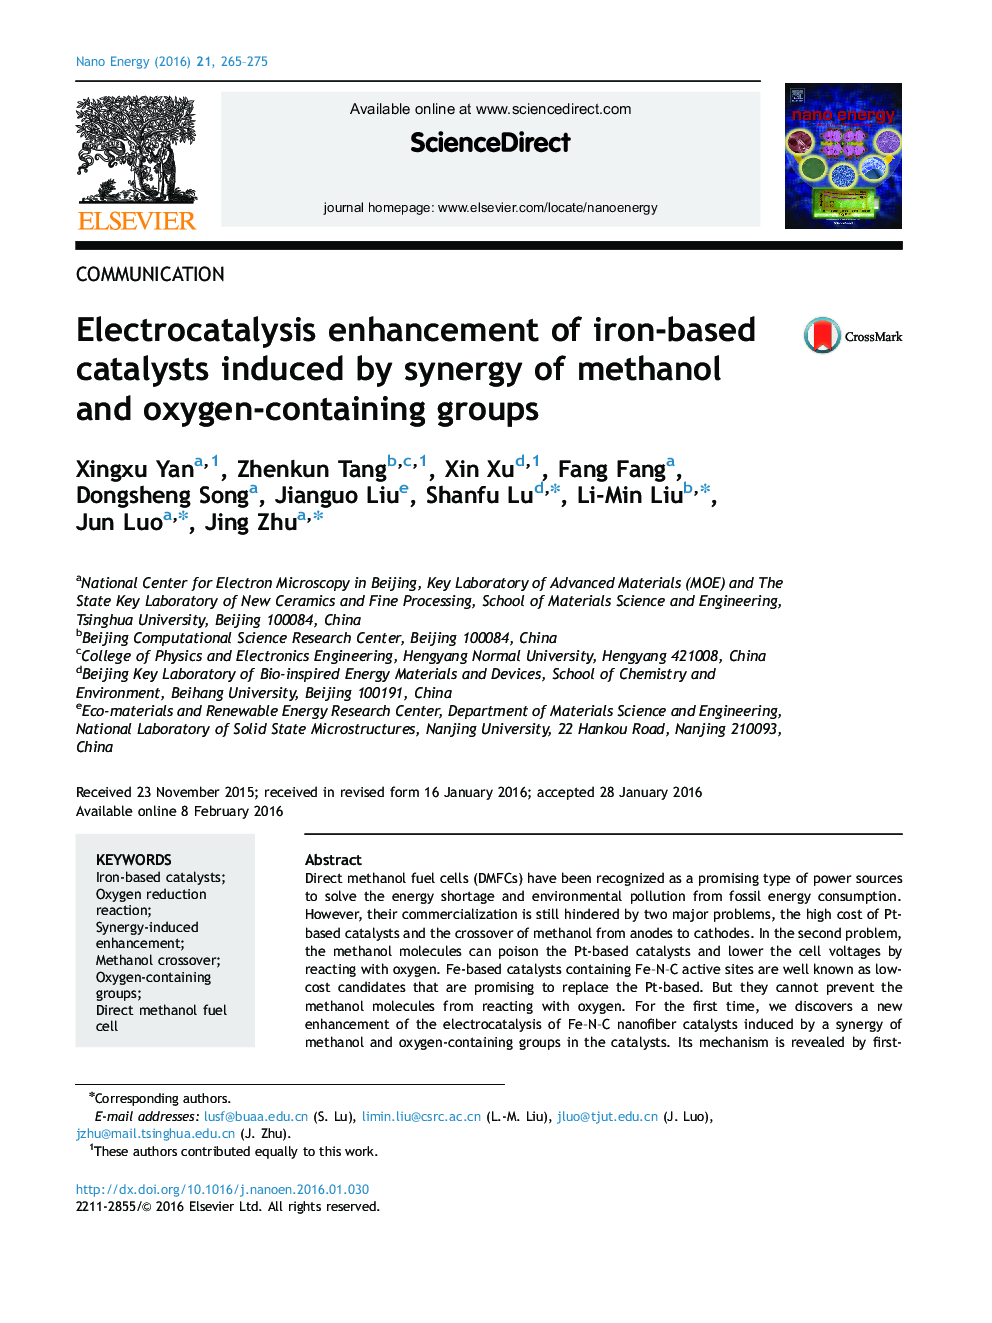 Electrocatalysis enhancement of iron-based catalysts induced by synergy of methanol and oxygen-containing groups